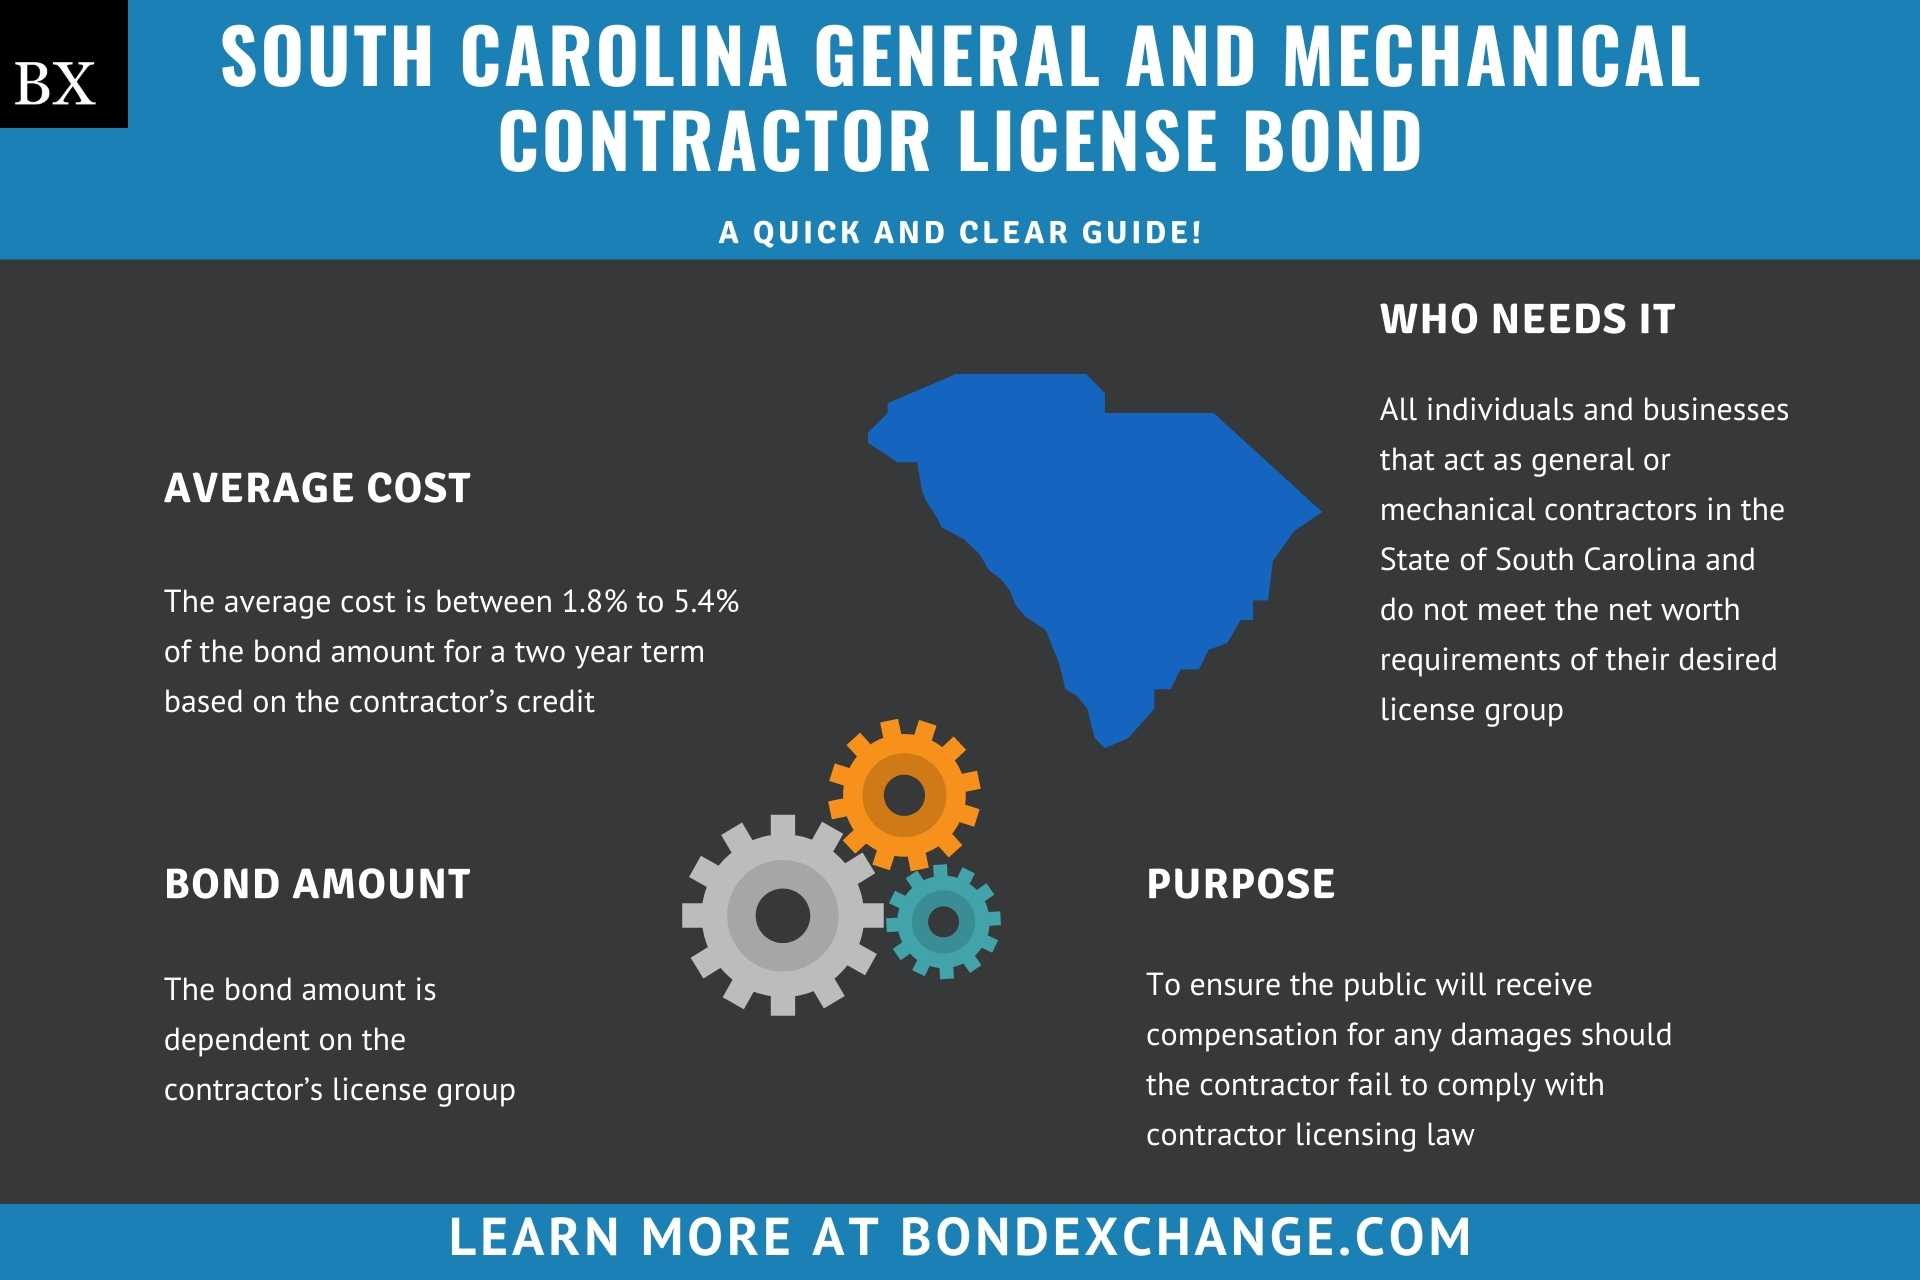 South Carolina General and Mechanical Contractor License Bond